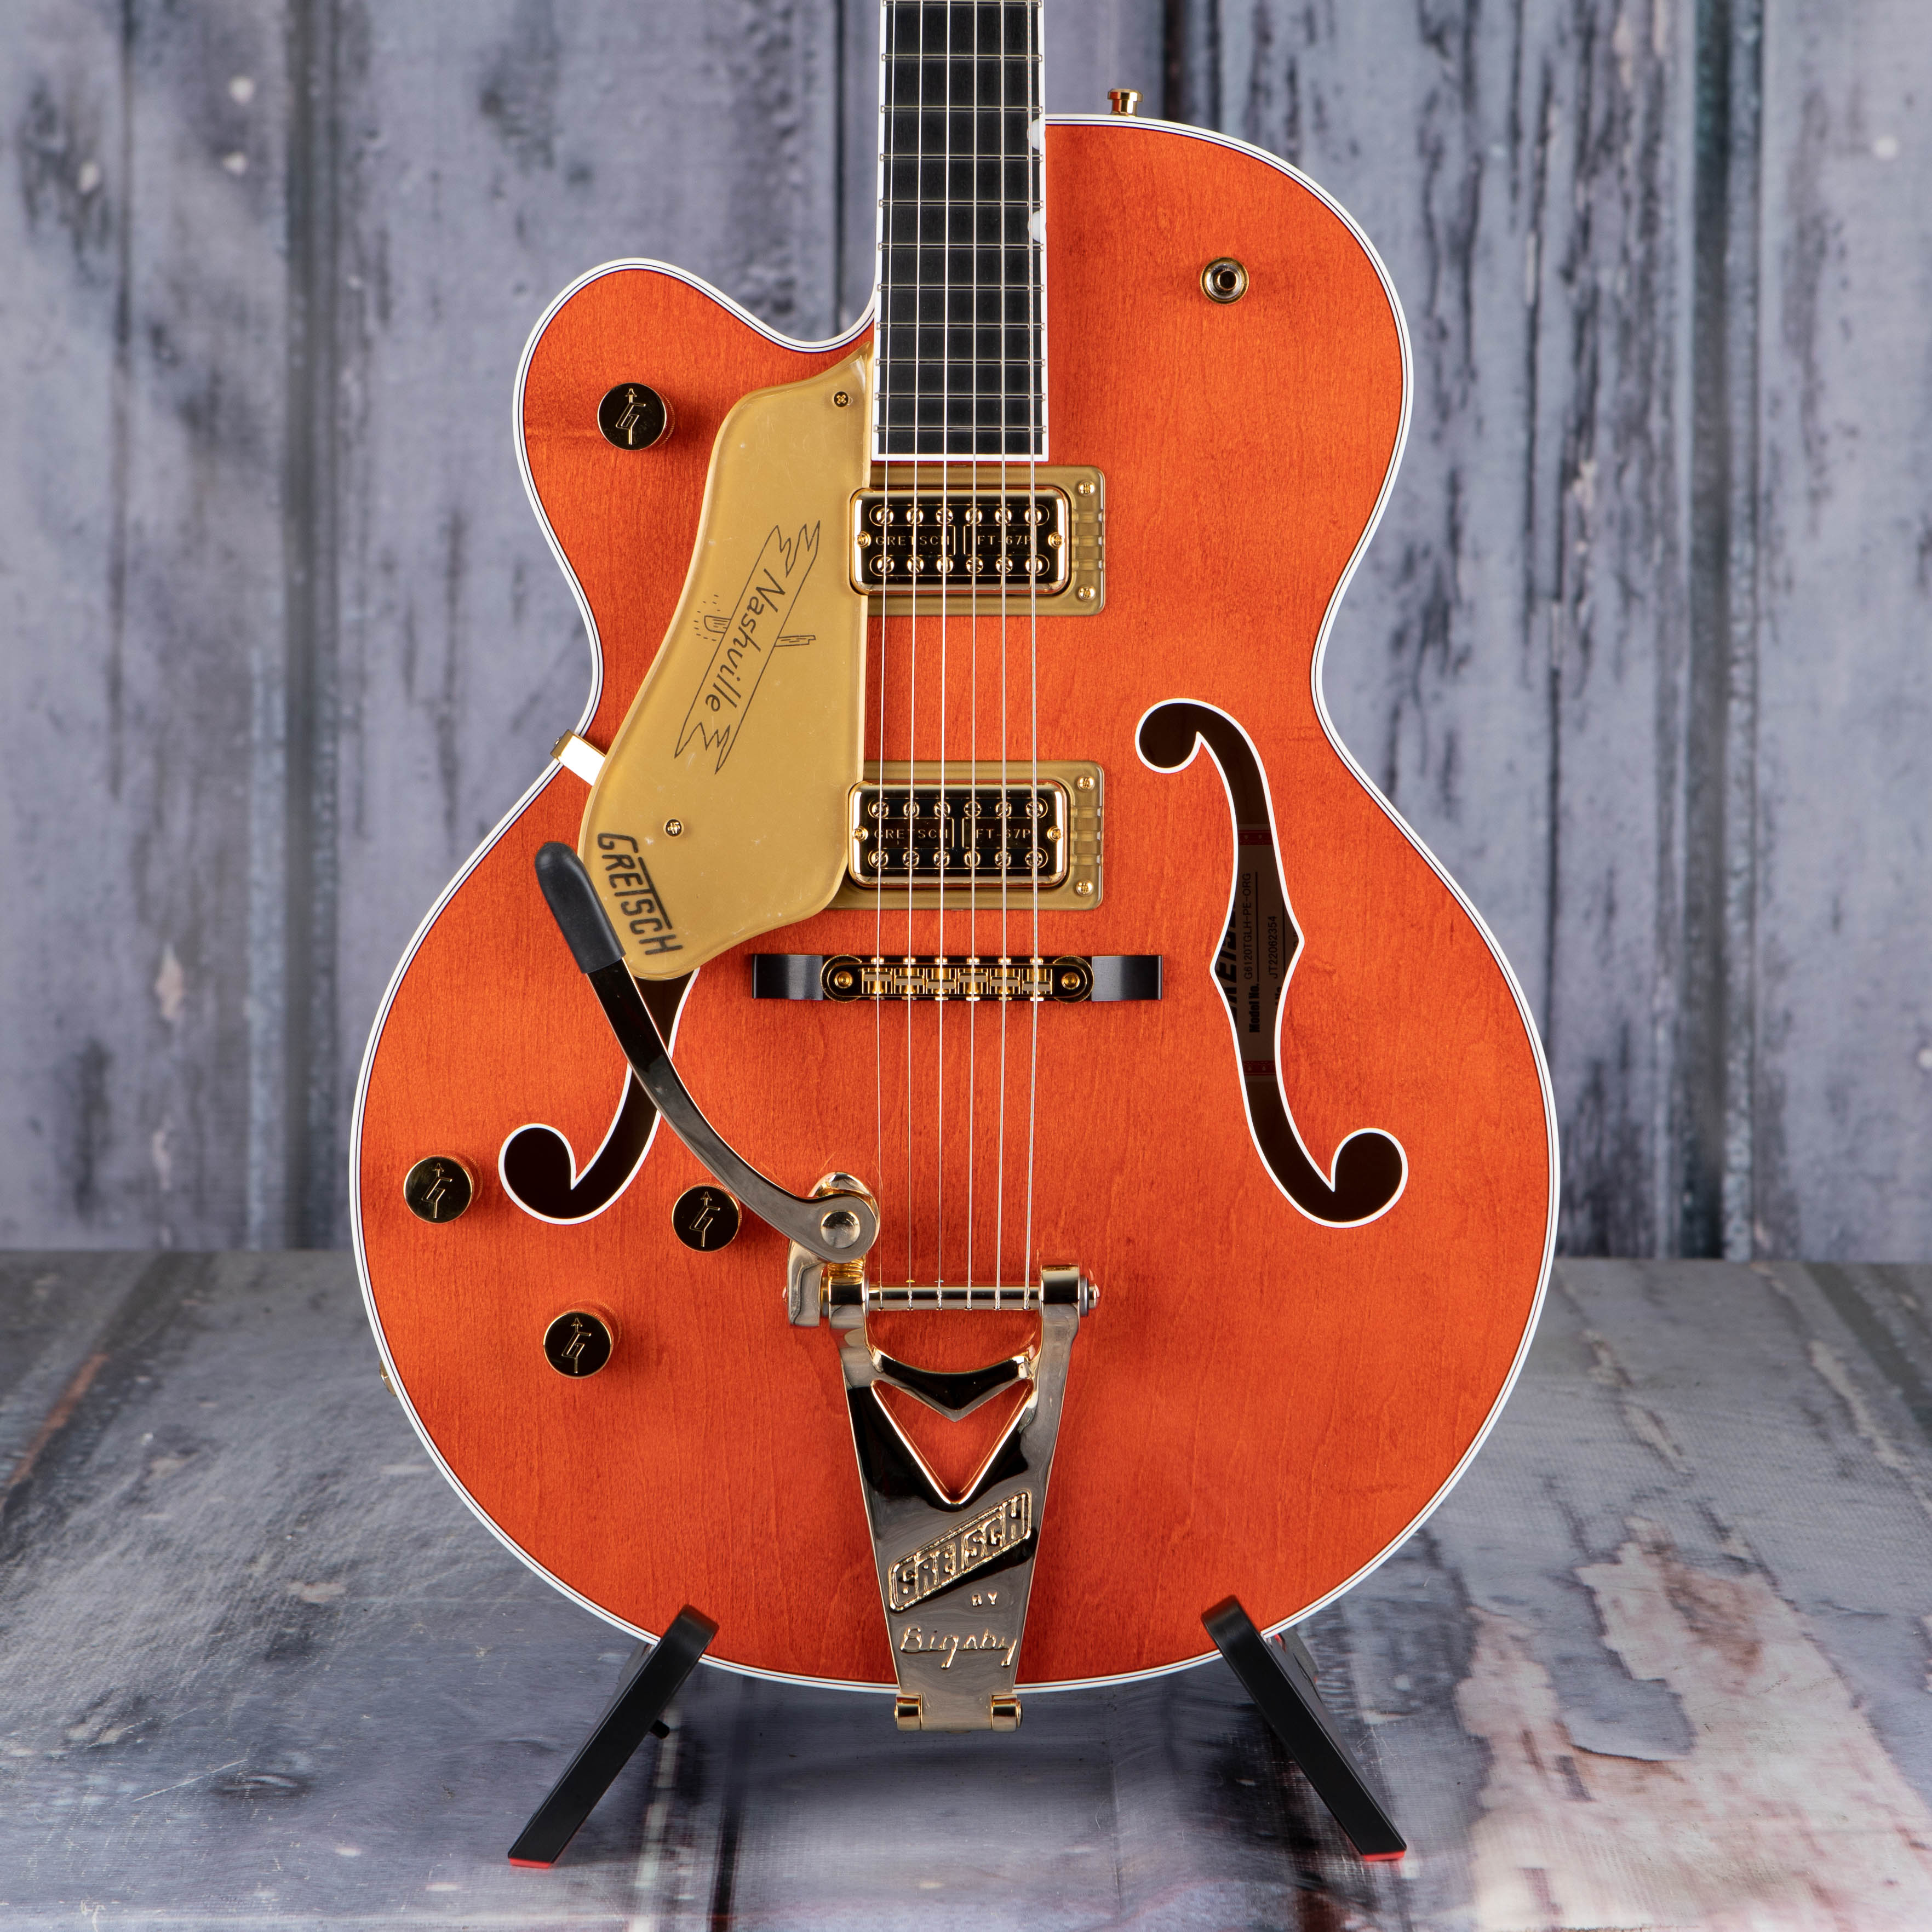 Gretsch G6120TG-LH Players Edition Nashville Hollowbody W/ String-Thru Bigsby And Gold Hardware Left-Handed Guitar, Orange Stain, front closeup